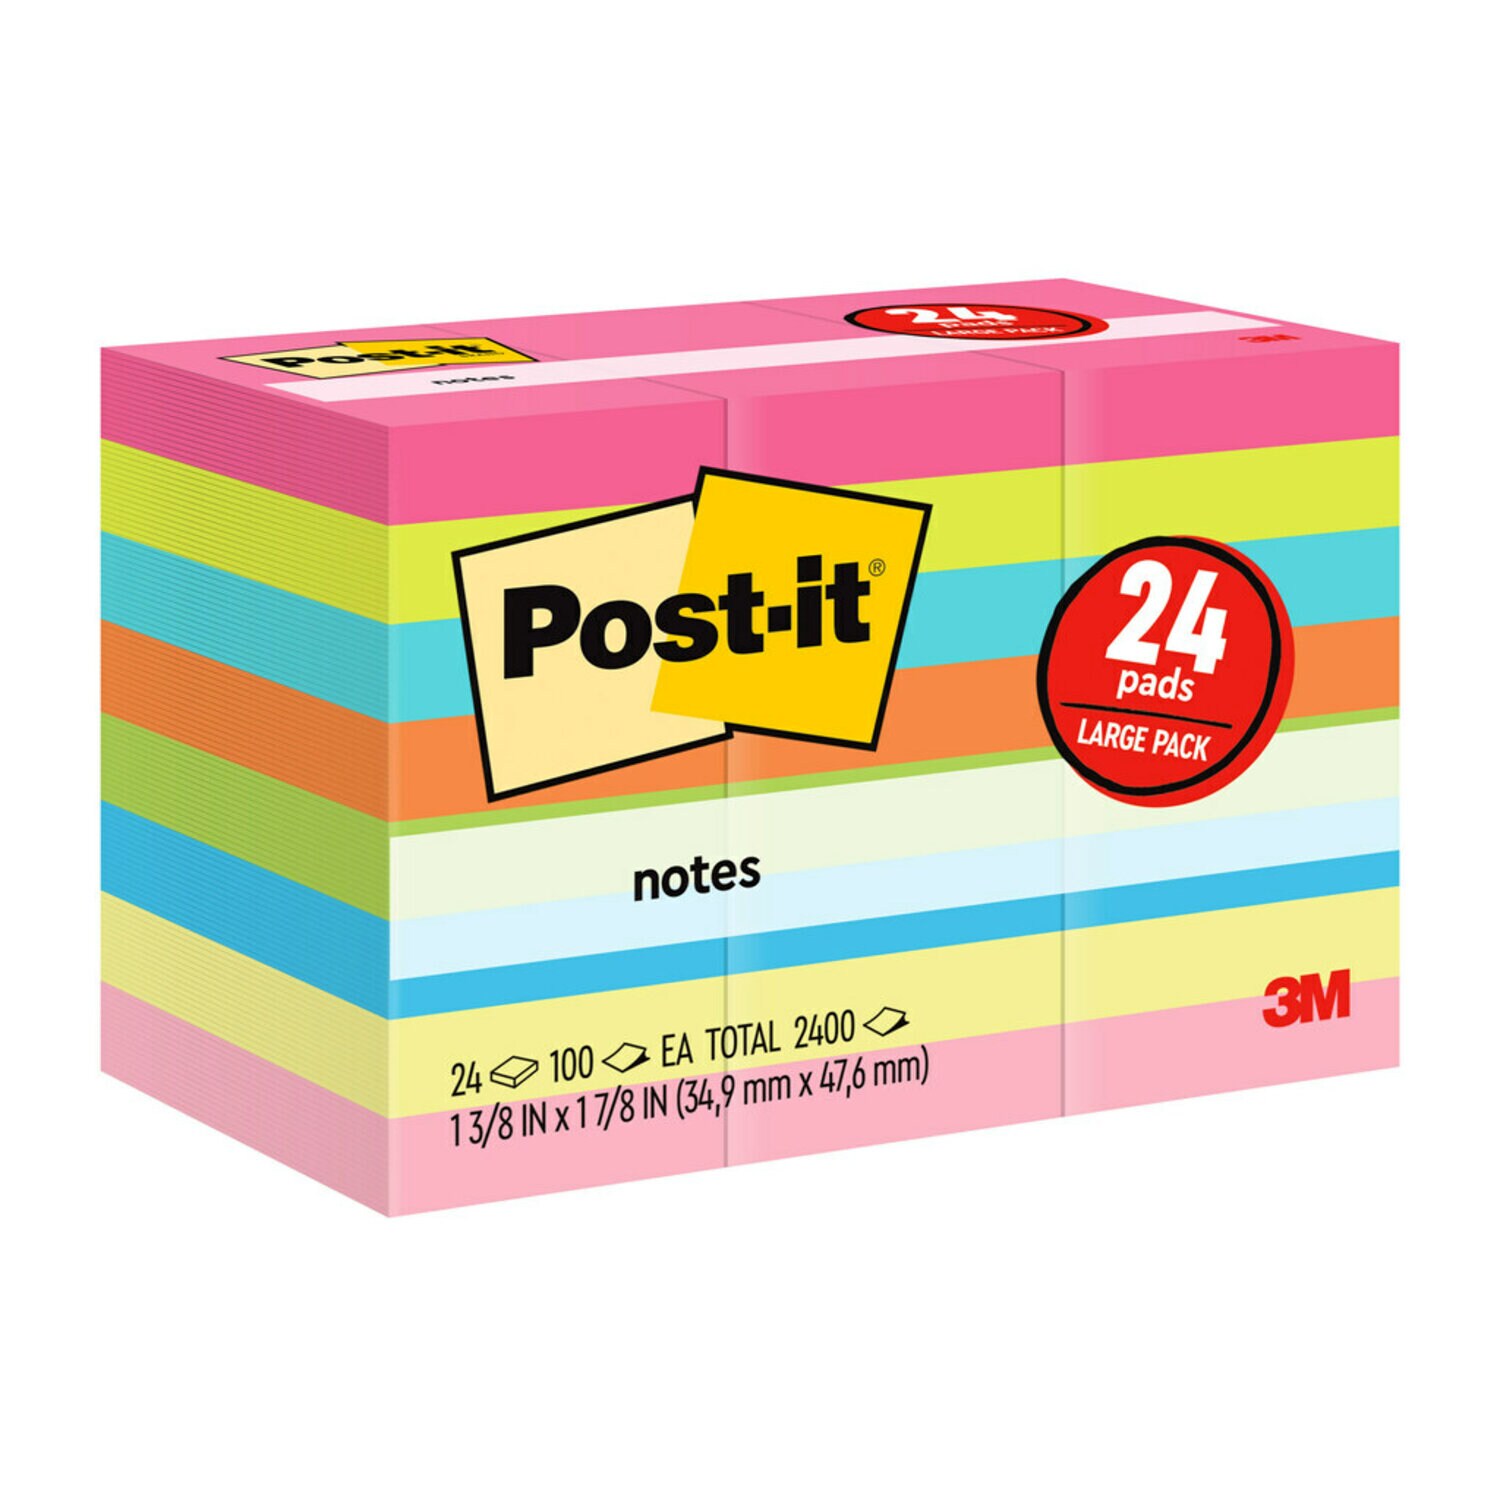 7010311453 - Post-it Notes 653-Club-07, 1-3/8 in x 1-7/8 in (34,9 mm x 47,6 mm)
Jaipur/Capetown colors